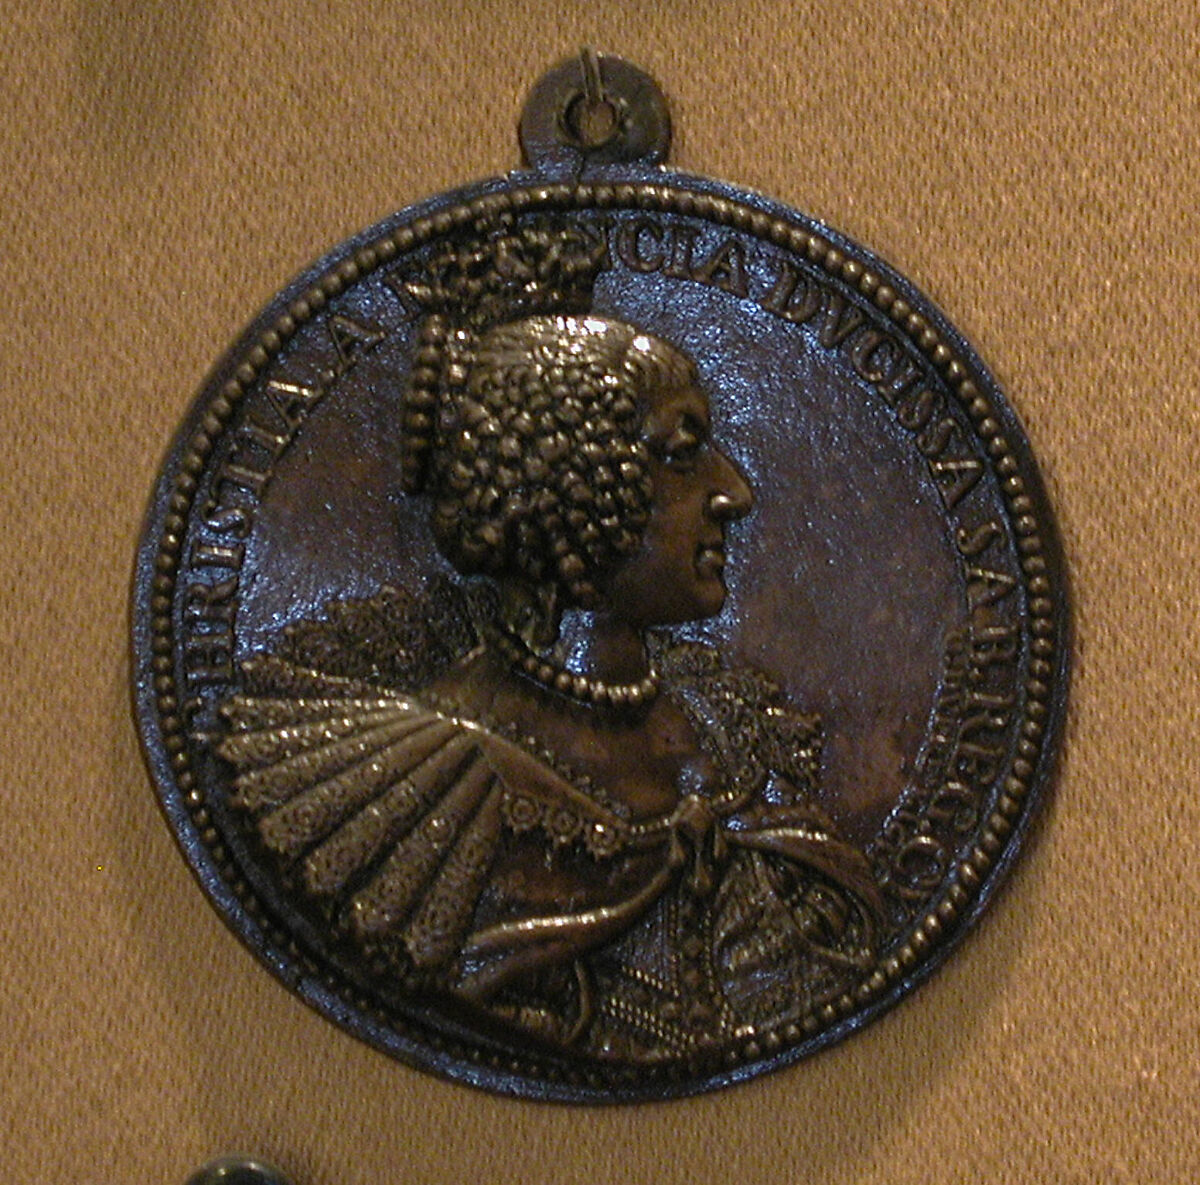 Christine of France, Duchess of Savoy (1608–63), Medalist: Guillaume Dupré (French, 1579–1640), Bronze, French, Paris 